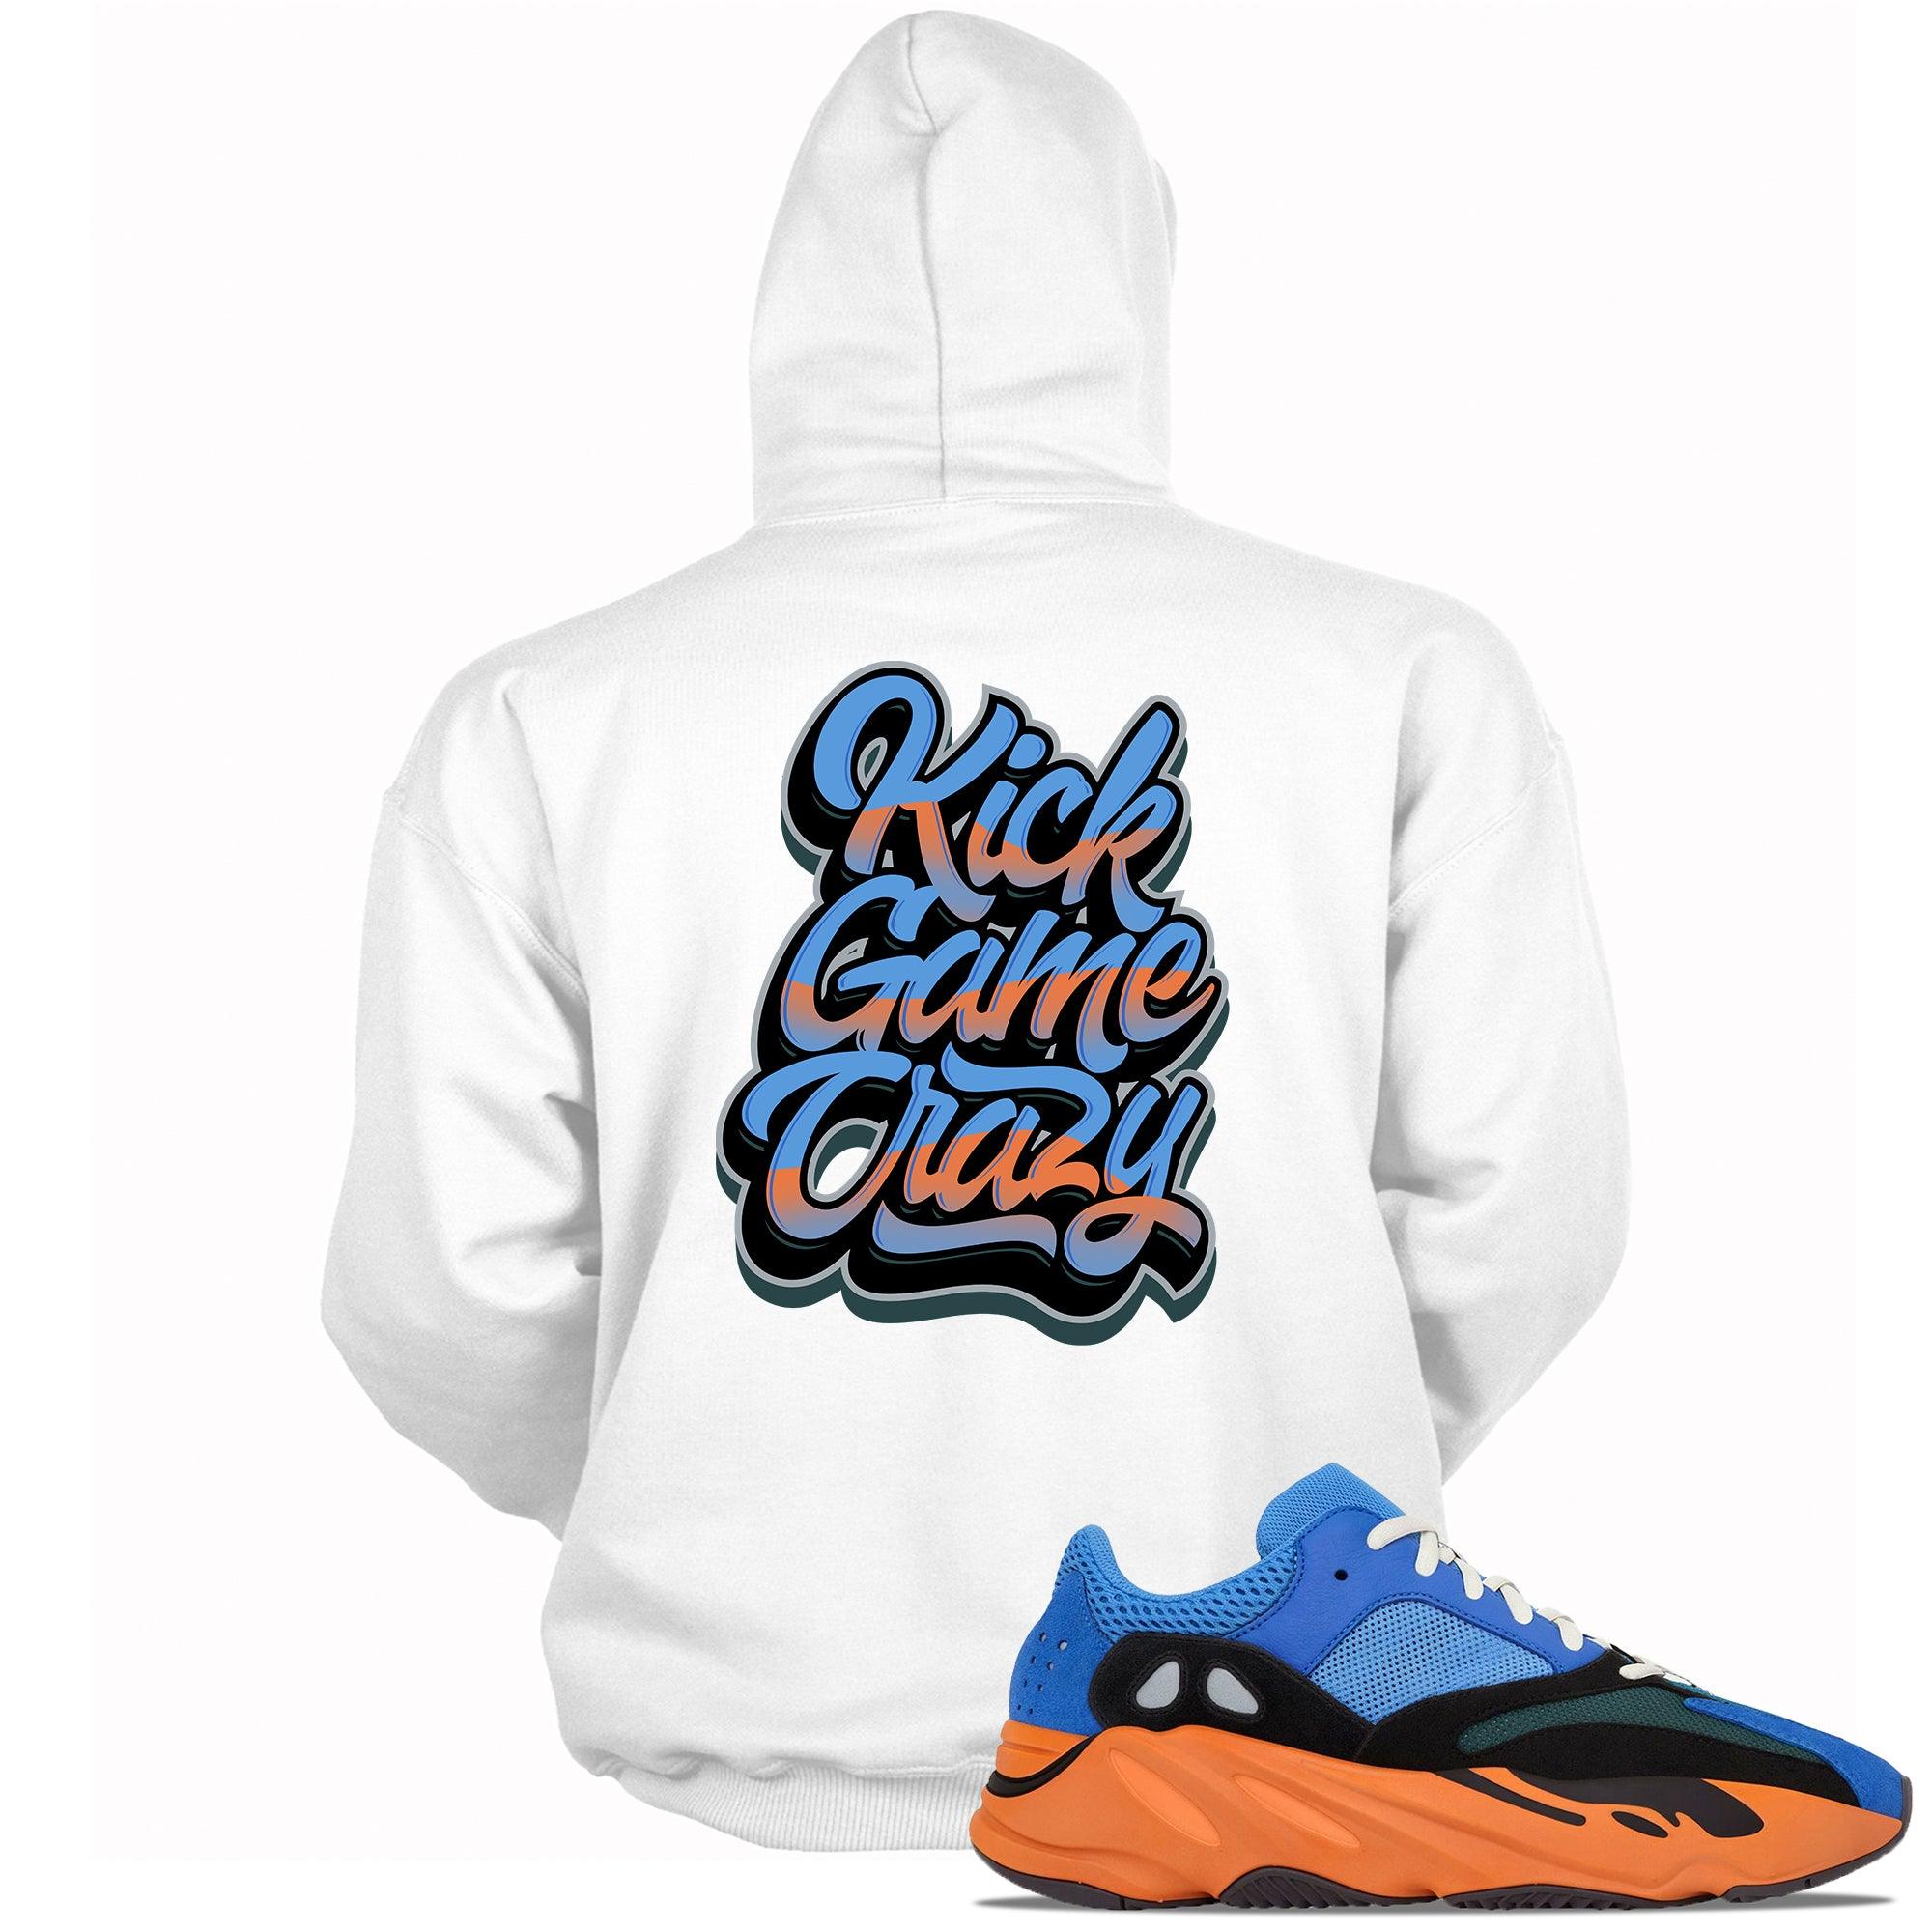 White Kick Game Crazy Hoodie Yeezy Boost 700s Bright Blue photo